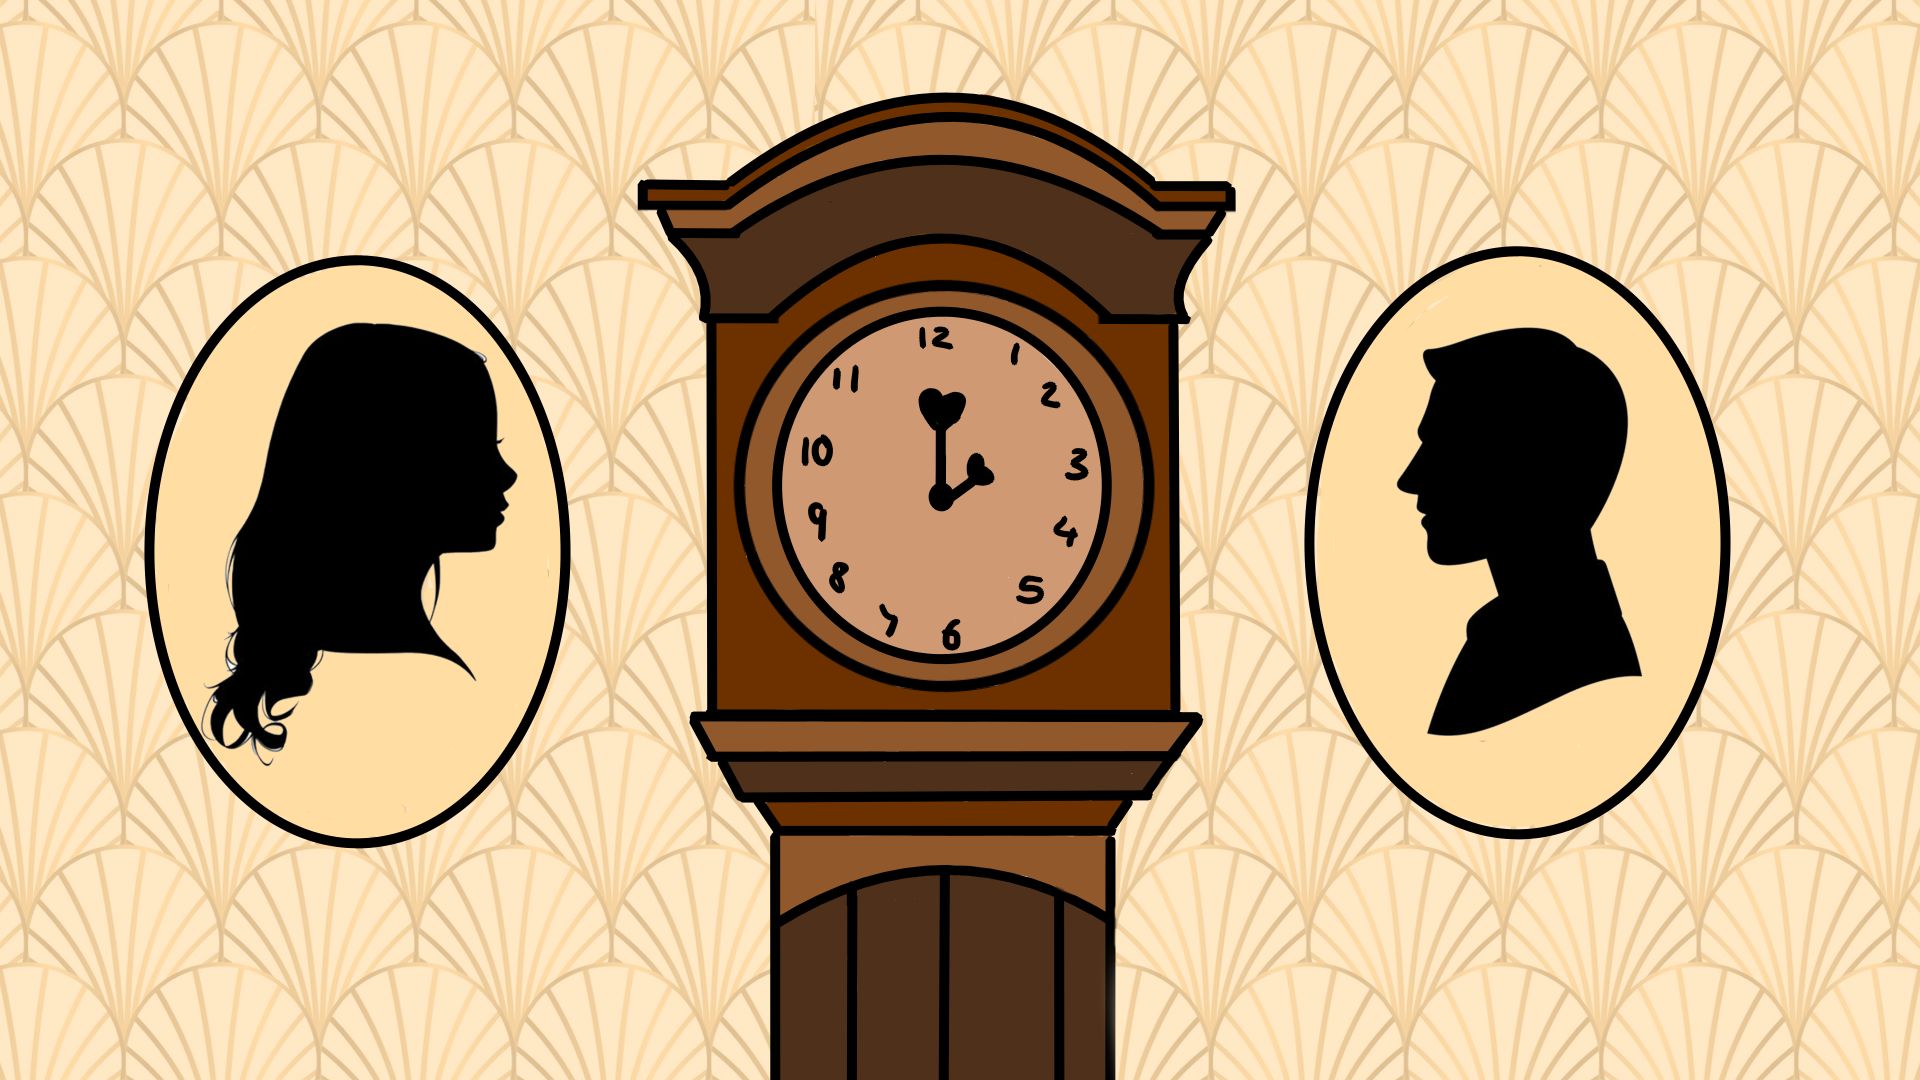 Illustration of a grandfather clock between silhouettes of a woman and a man